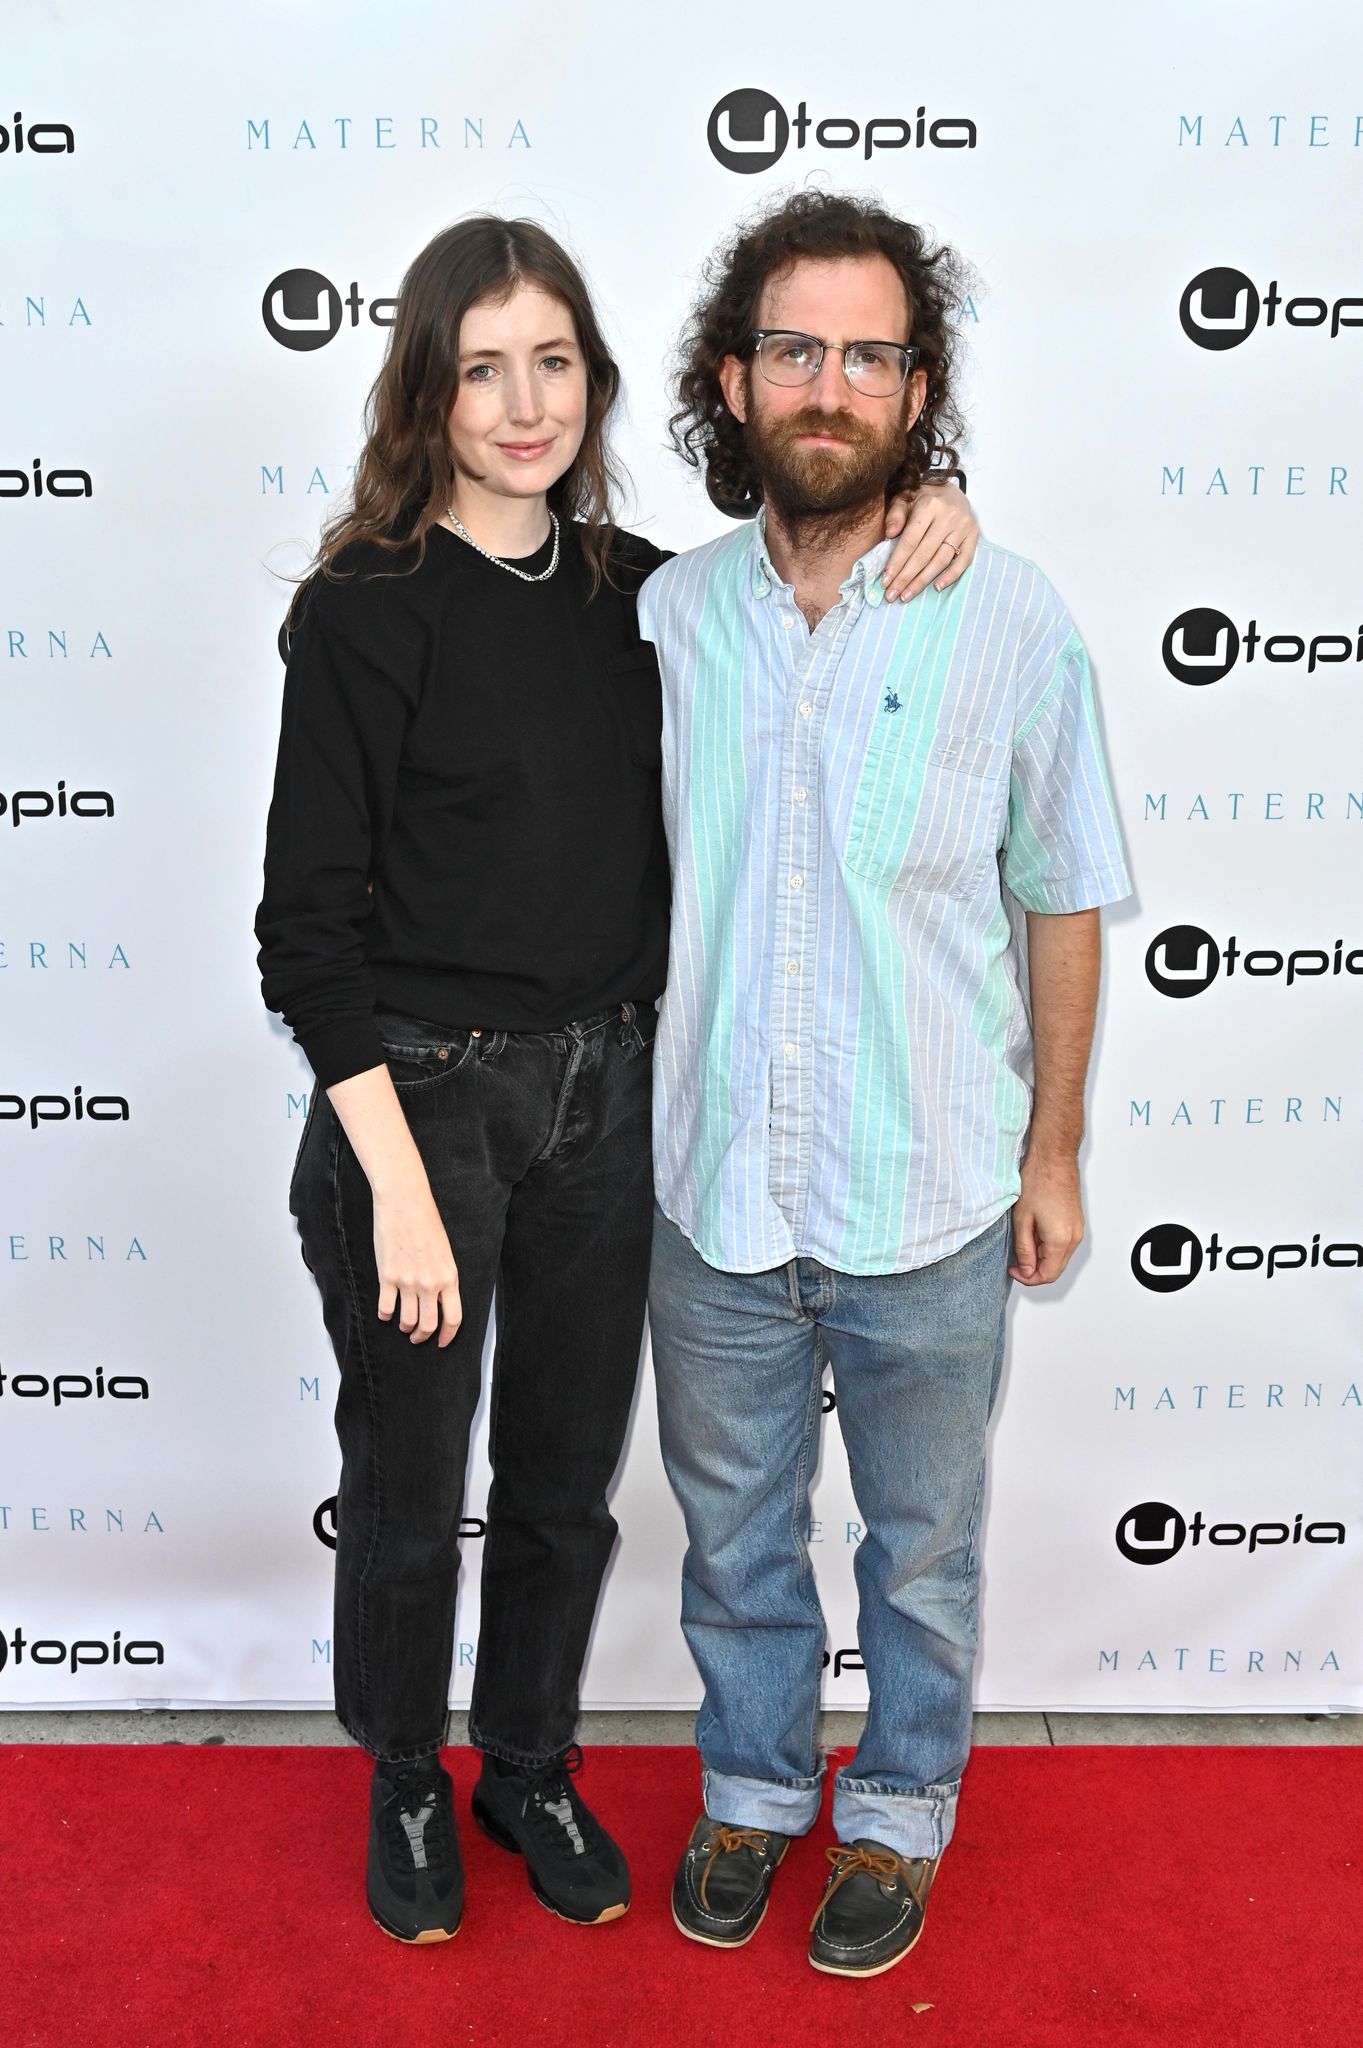 Kate Lyn Sheil and Kyle Mooney during the "Materna" film screening at Lumiere Music Hall on August 10, 2021, in Beverly Hills, California. | Source: Getty Images